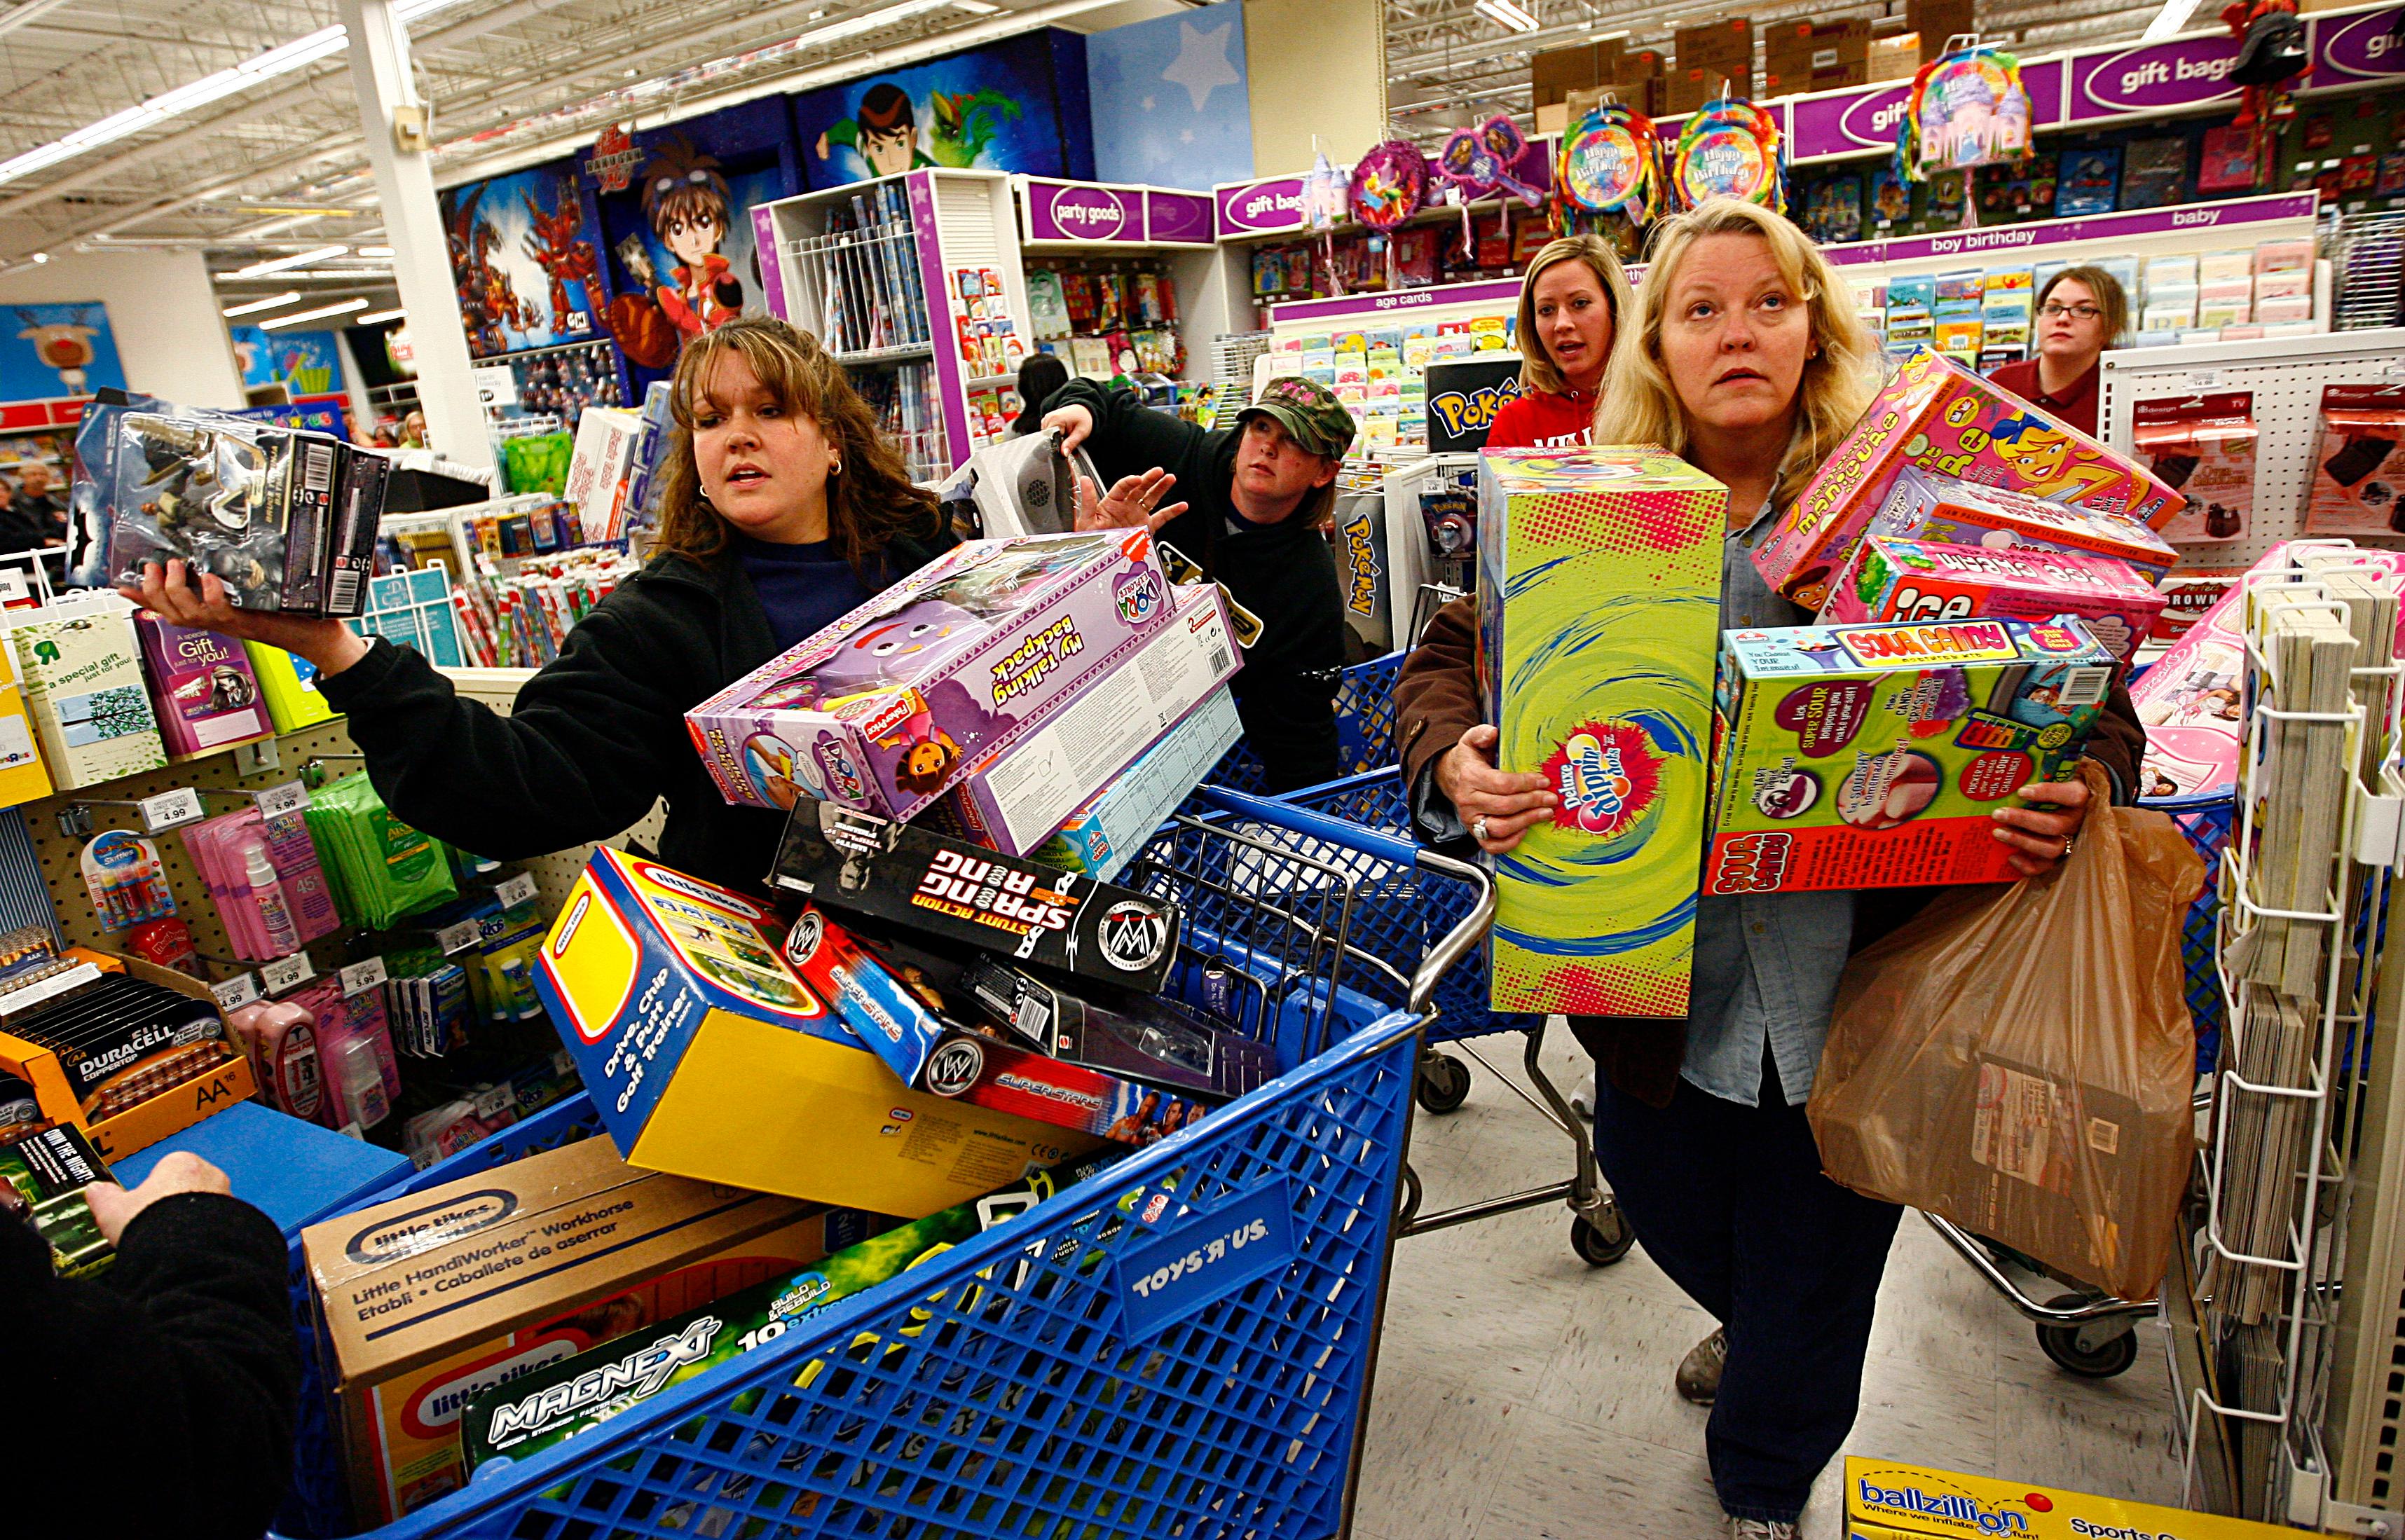 Is Black Friday Happening This Year?